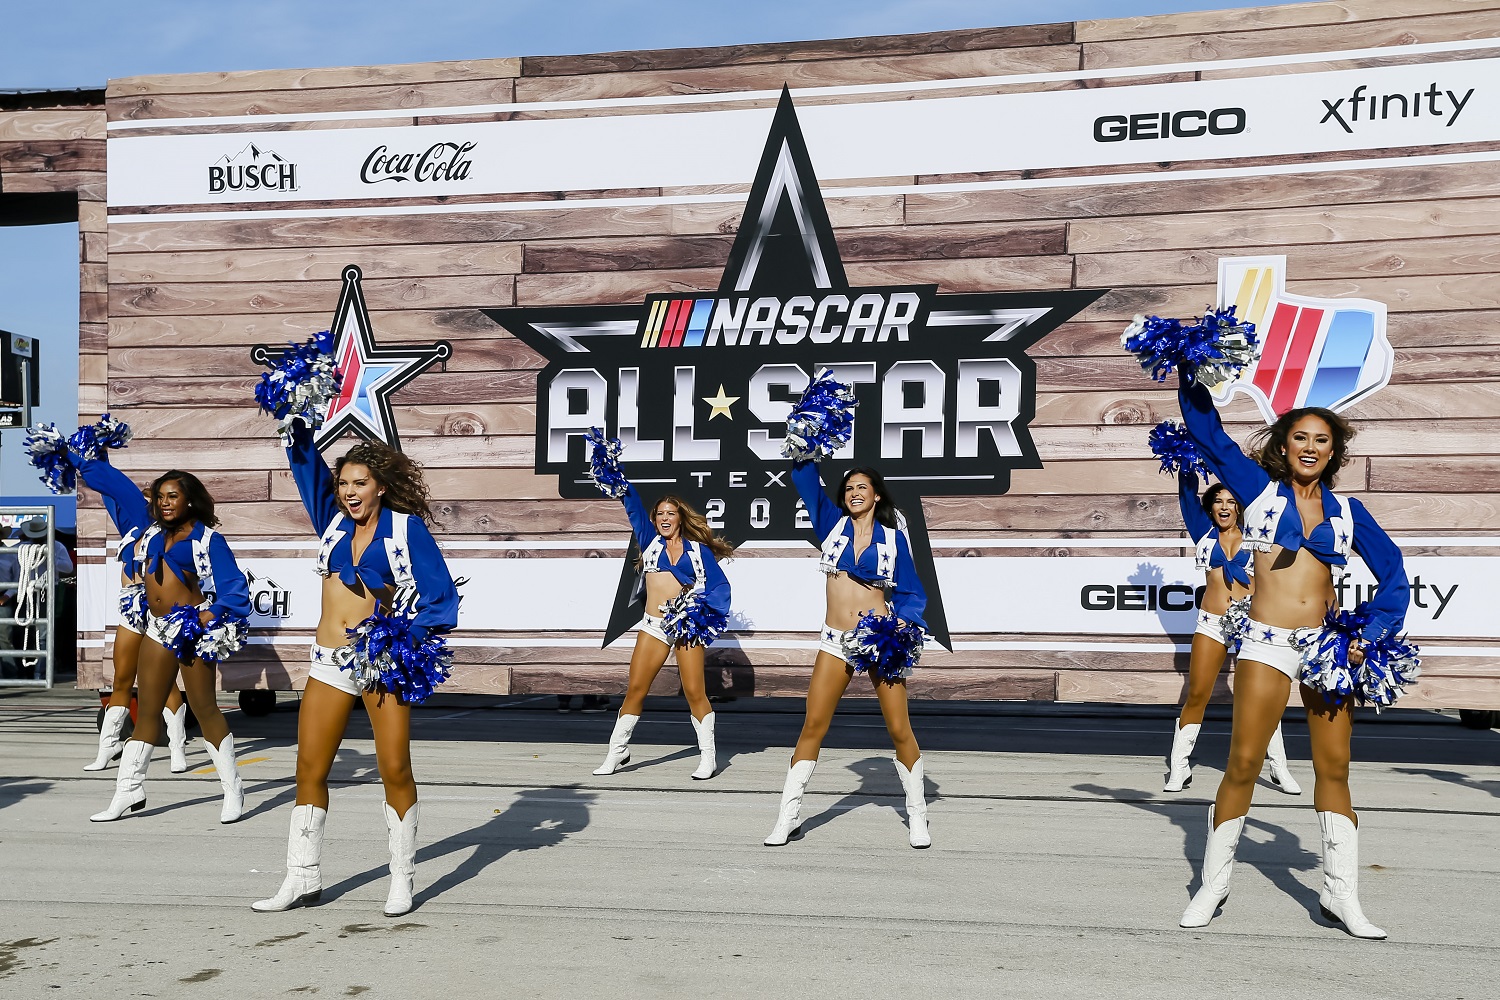 The Dallas Cowboys Cheerleaders perform before the NASCAR Cup Series All-Star race on June 13, 2021 at Texas Motor Speedway.